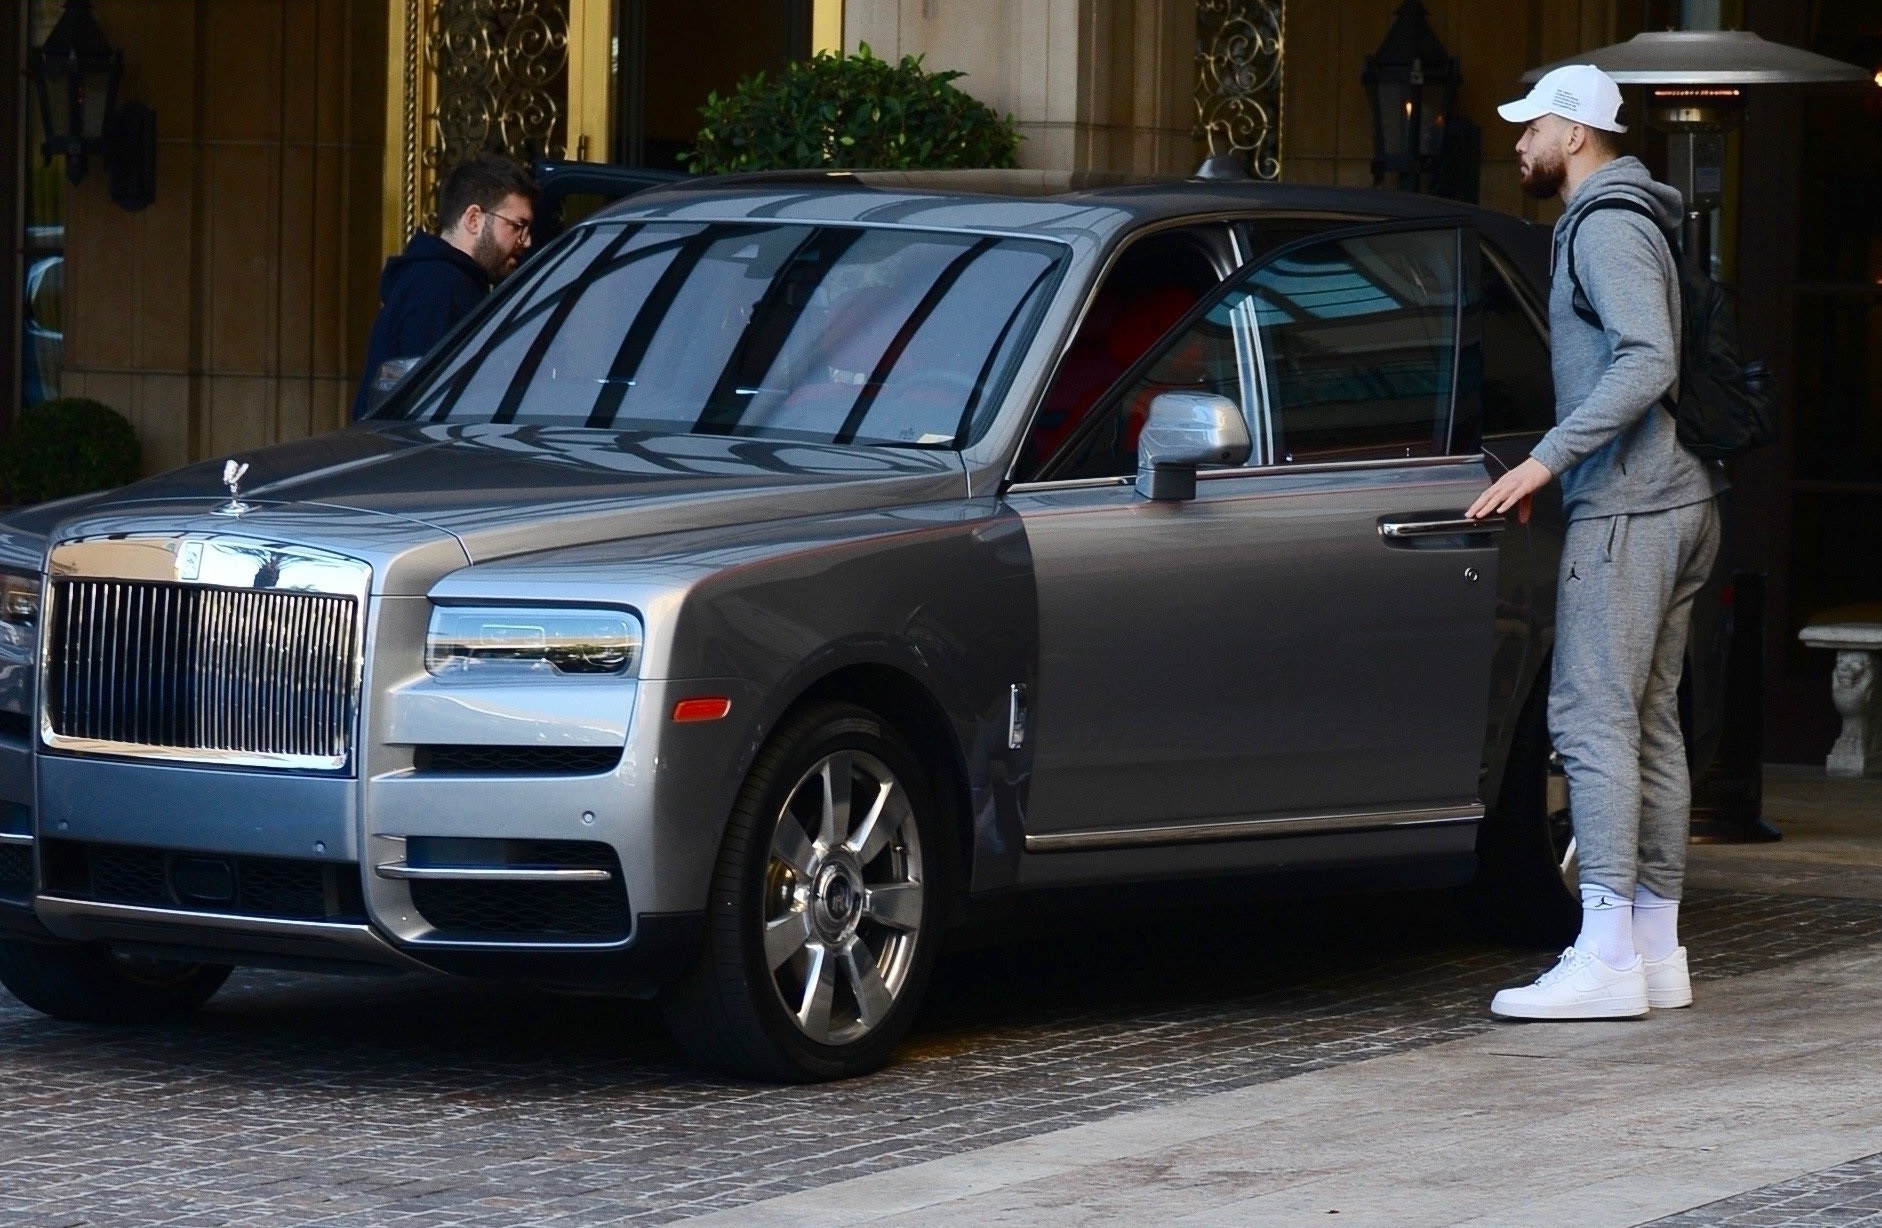 Blake Griffin Showing Off his Flashy Silver Rolls Royce in Beverly Hills -  Sports Gossip